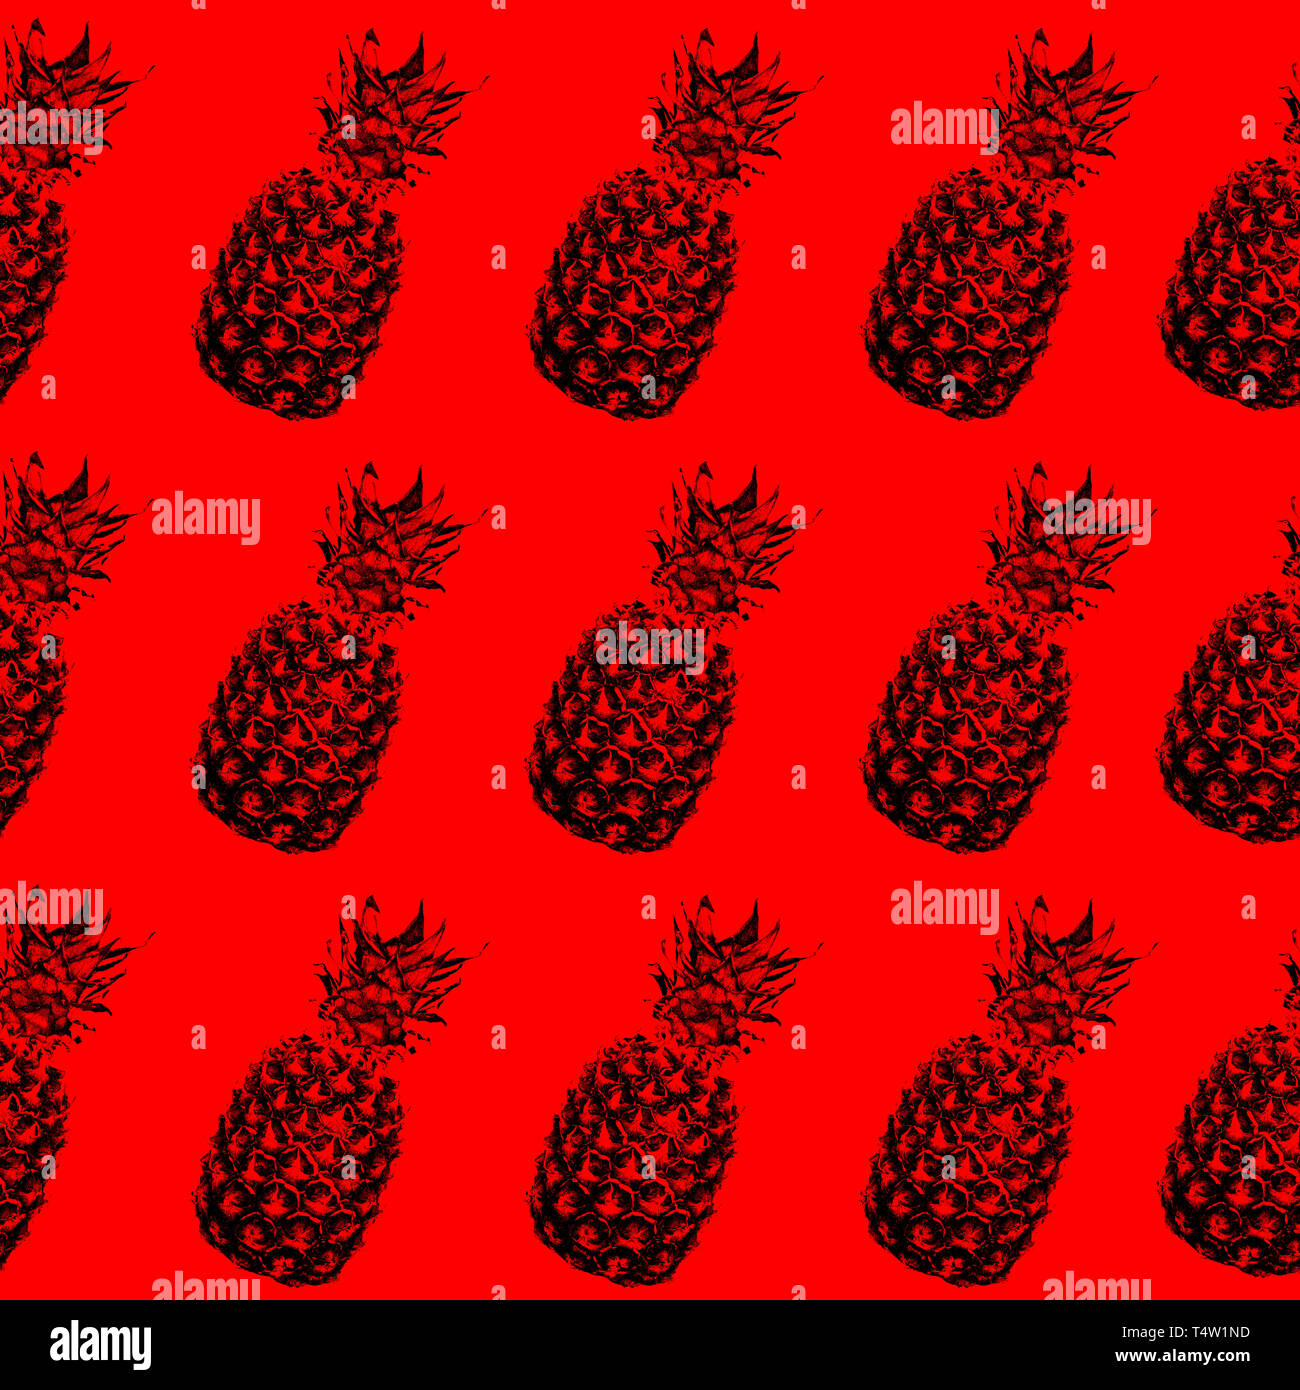 Seamless texture with black pineapple on a red background. Modern concept. Template for packaging, fabrics, wallpapers, backgrounds Stock Photo